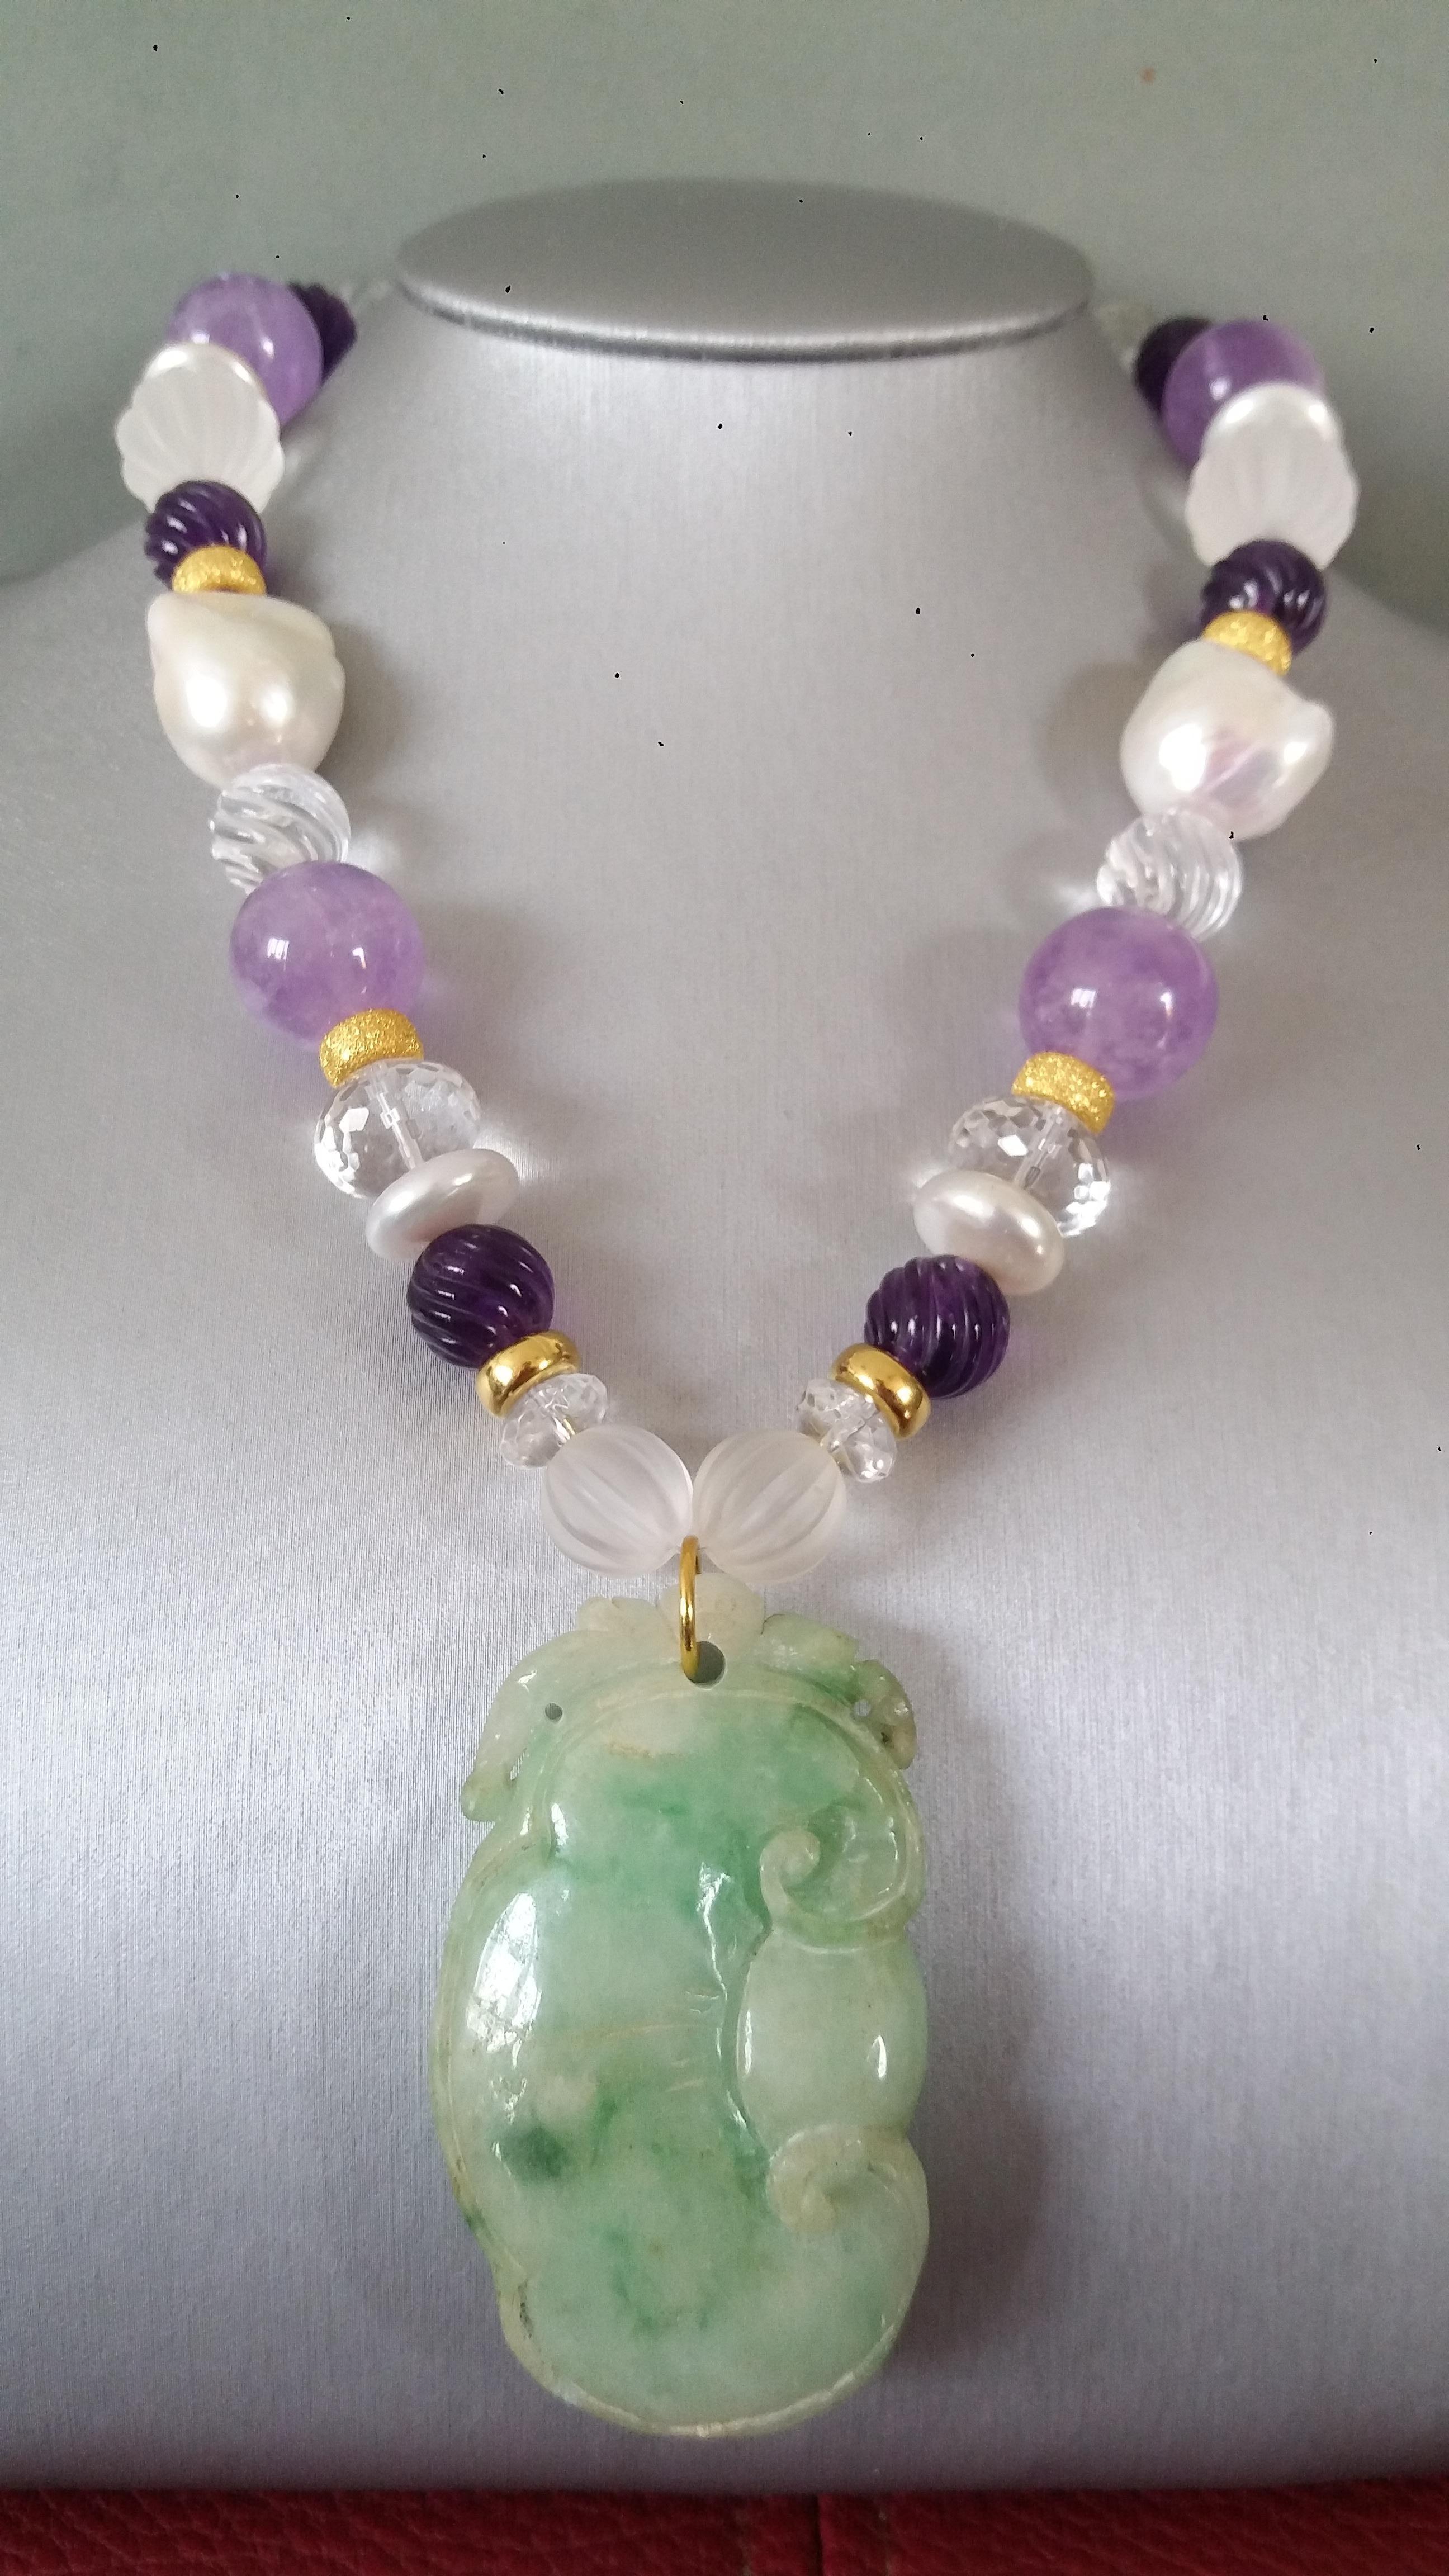 Unique and classic Necklace composed of big size Baroque Pearls, Plain Amethyst spheres of 16 mm, Engraved Amethyst spheres of 12 mm, Faceted and Engraved Quartz beads, 14 kt Yellow Gold elements, from which hangs a Vintage Green Burma Jade